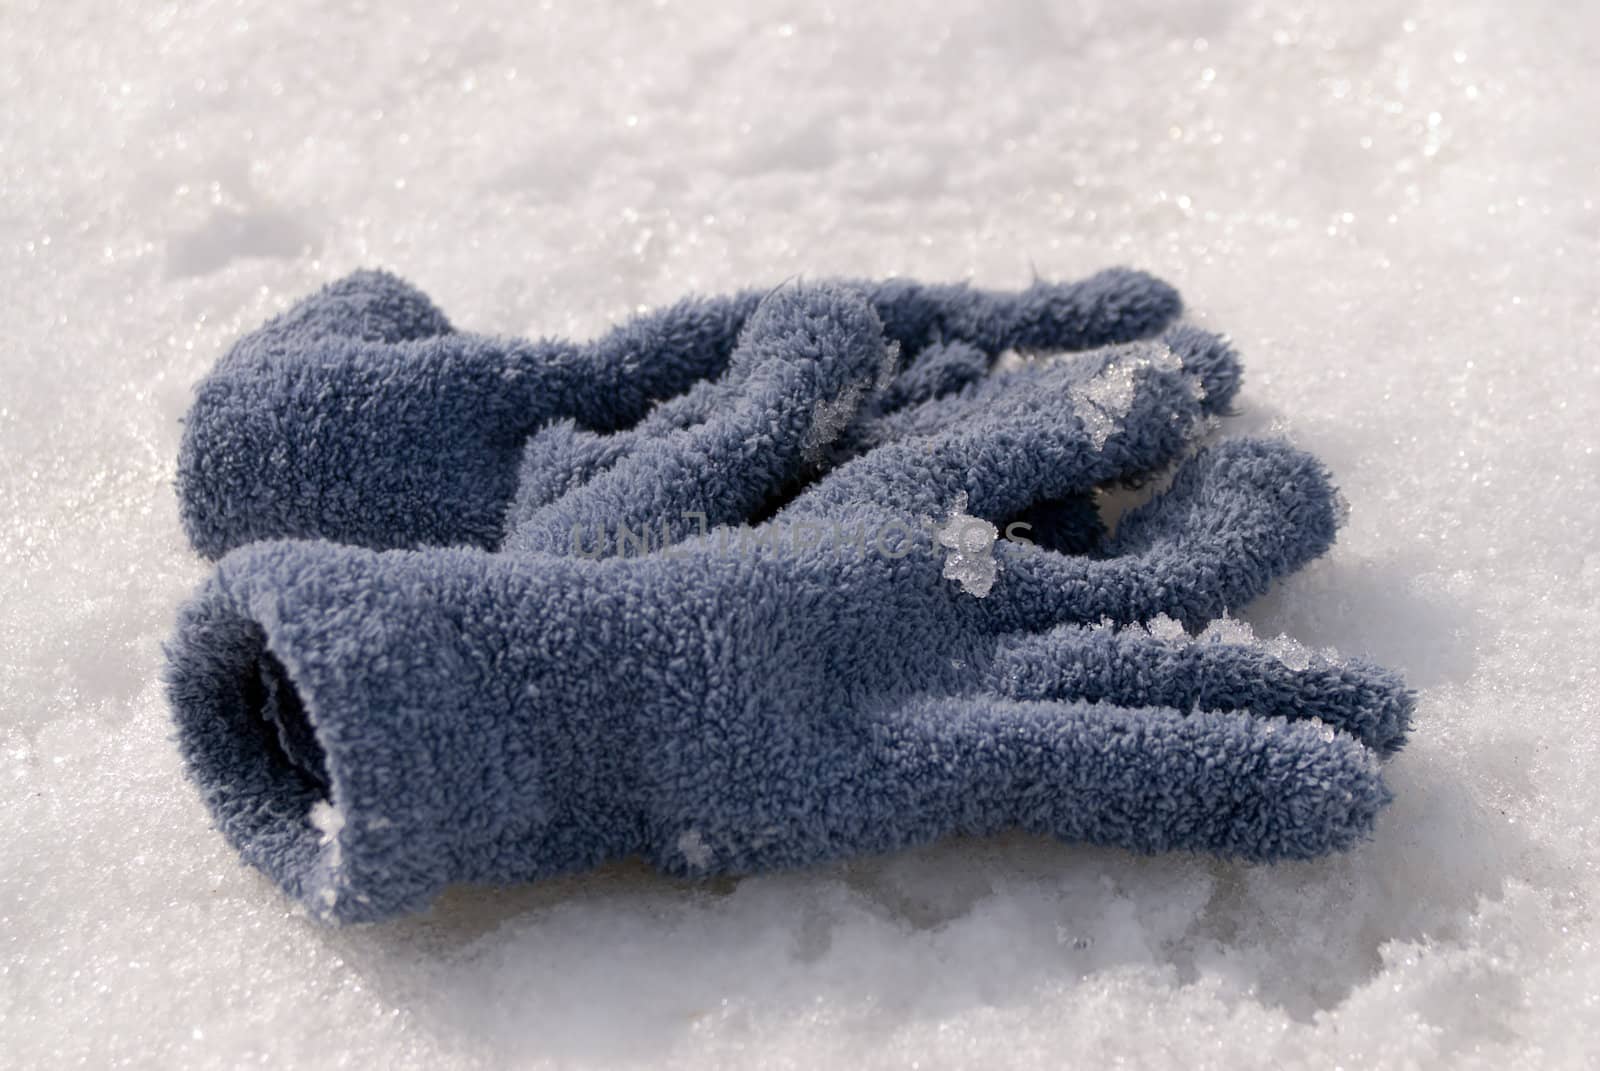 A pair of winter gloves lying in the snow